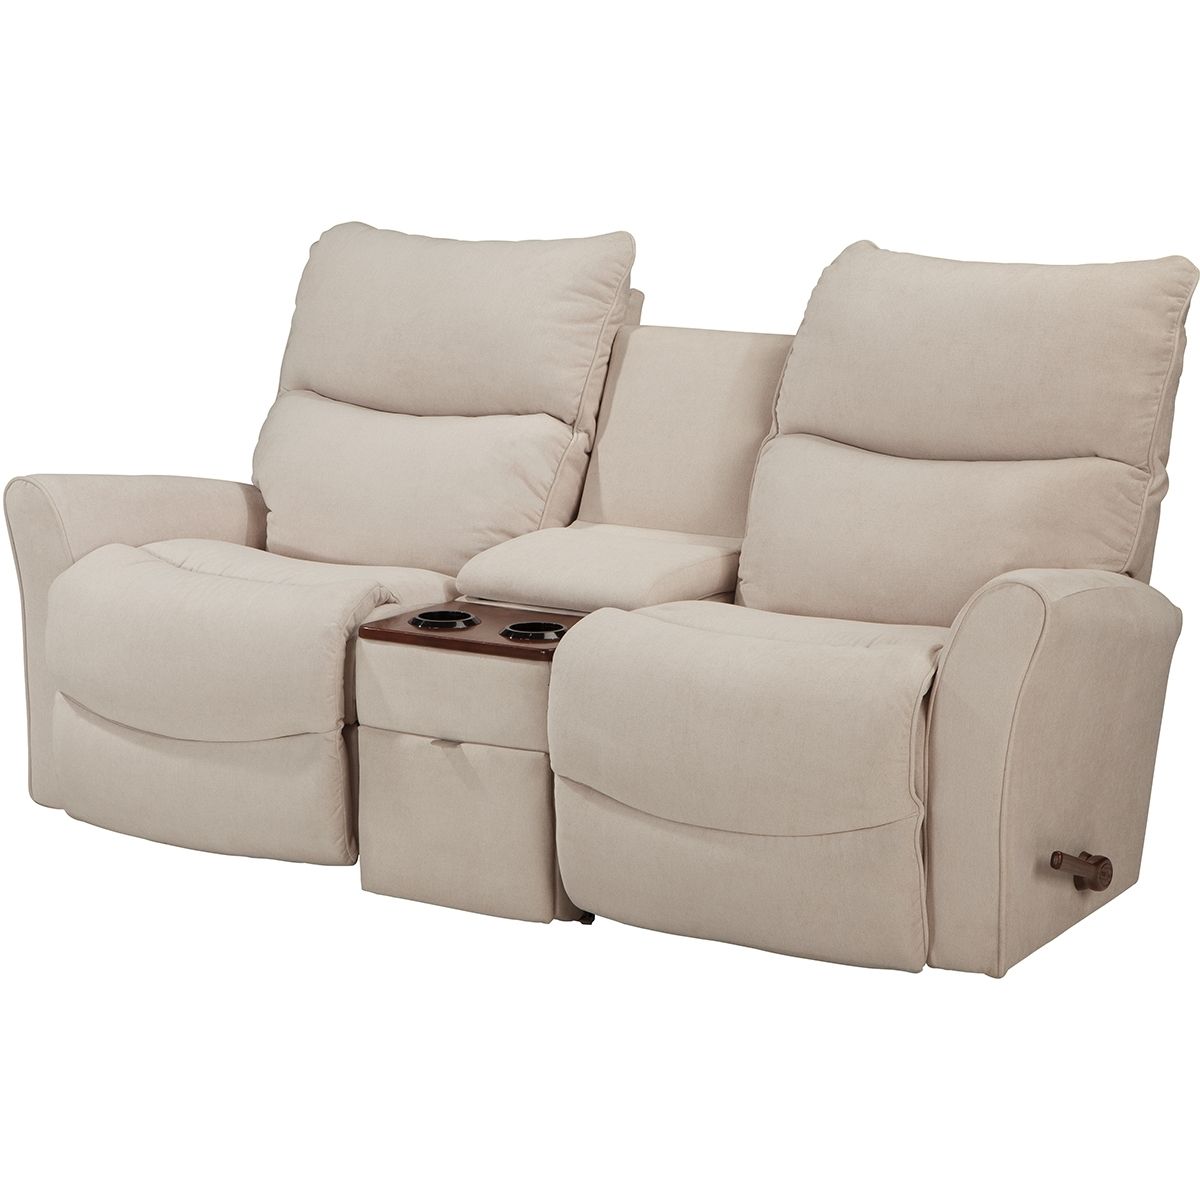 Sectional Sofas & Sectional Couches (View 1 of 20)